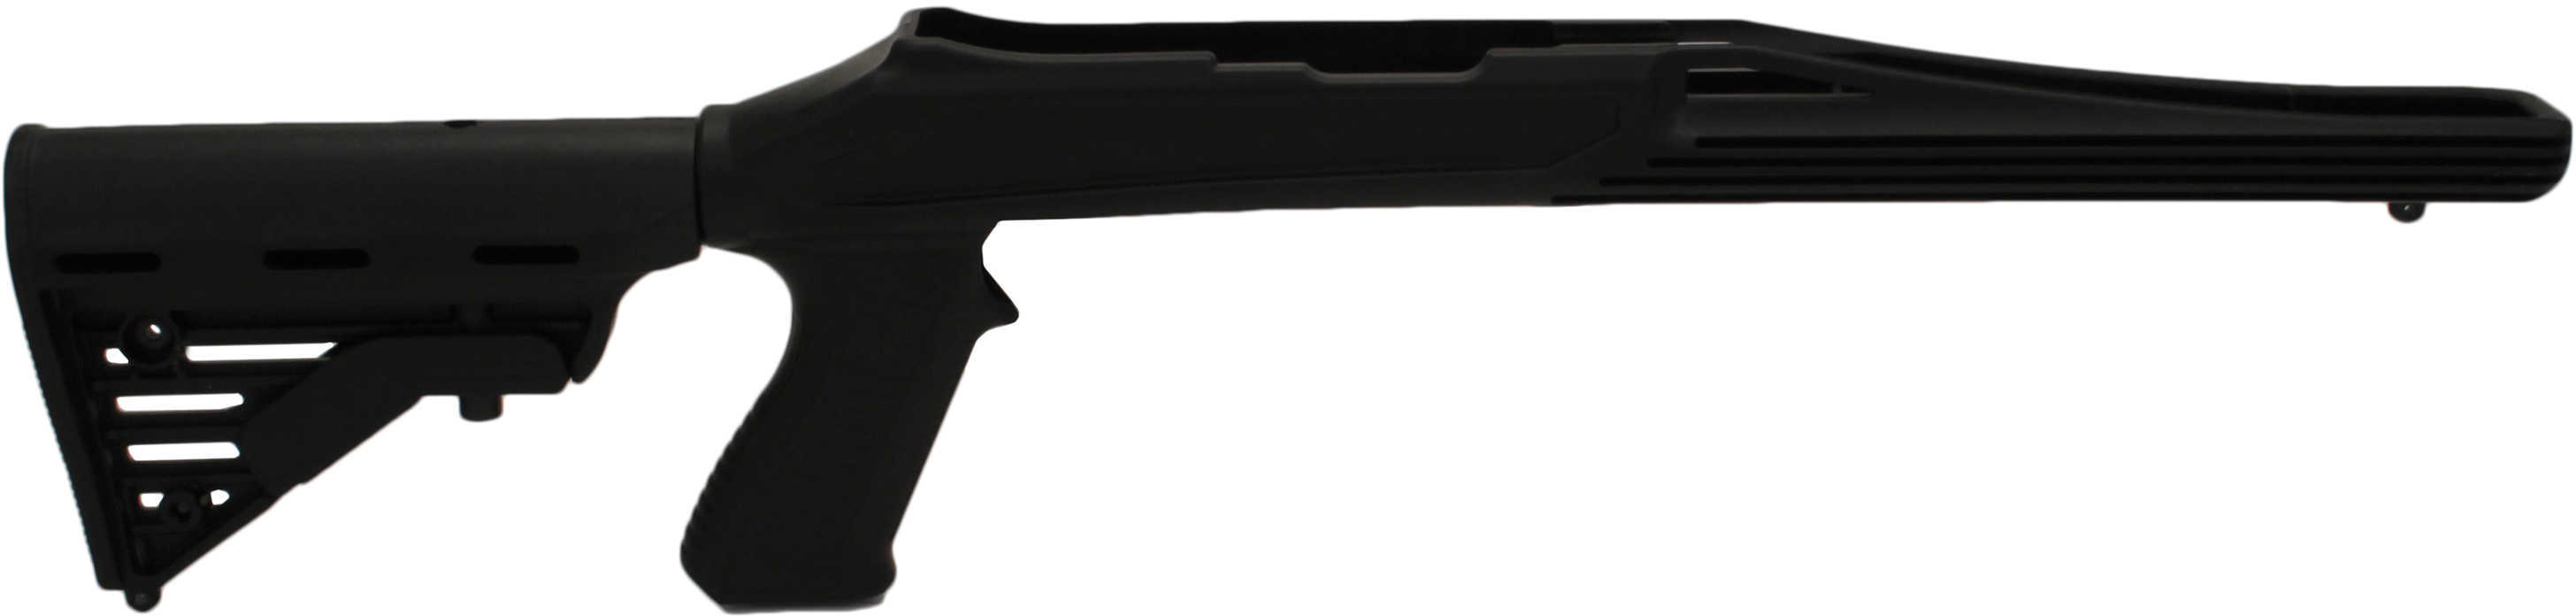 Blackhawk Knoxx Axiom R/F Rimfire Rifle Stock For Ruger® 10/22® Md: K98200C